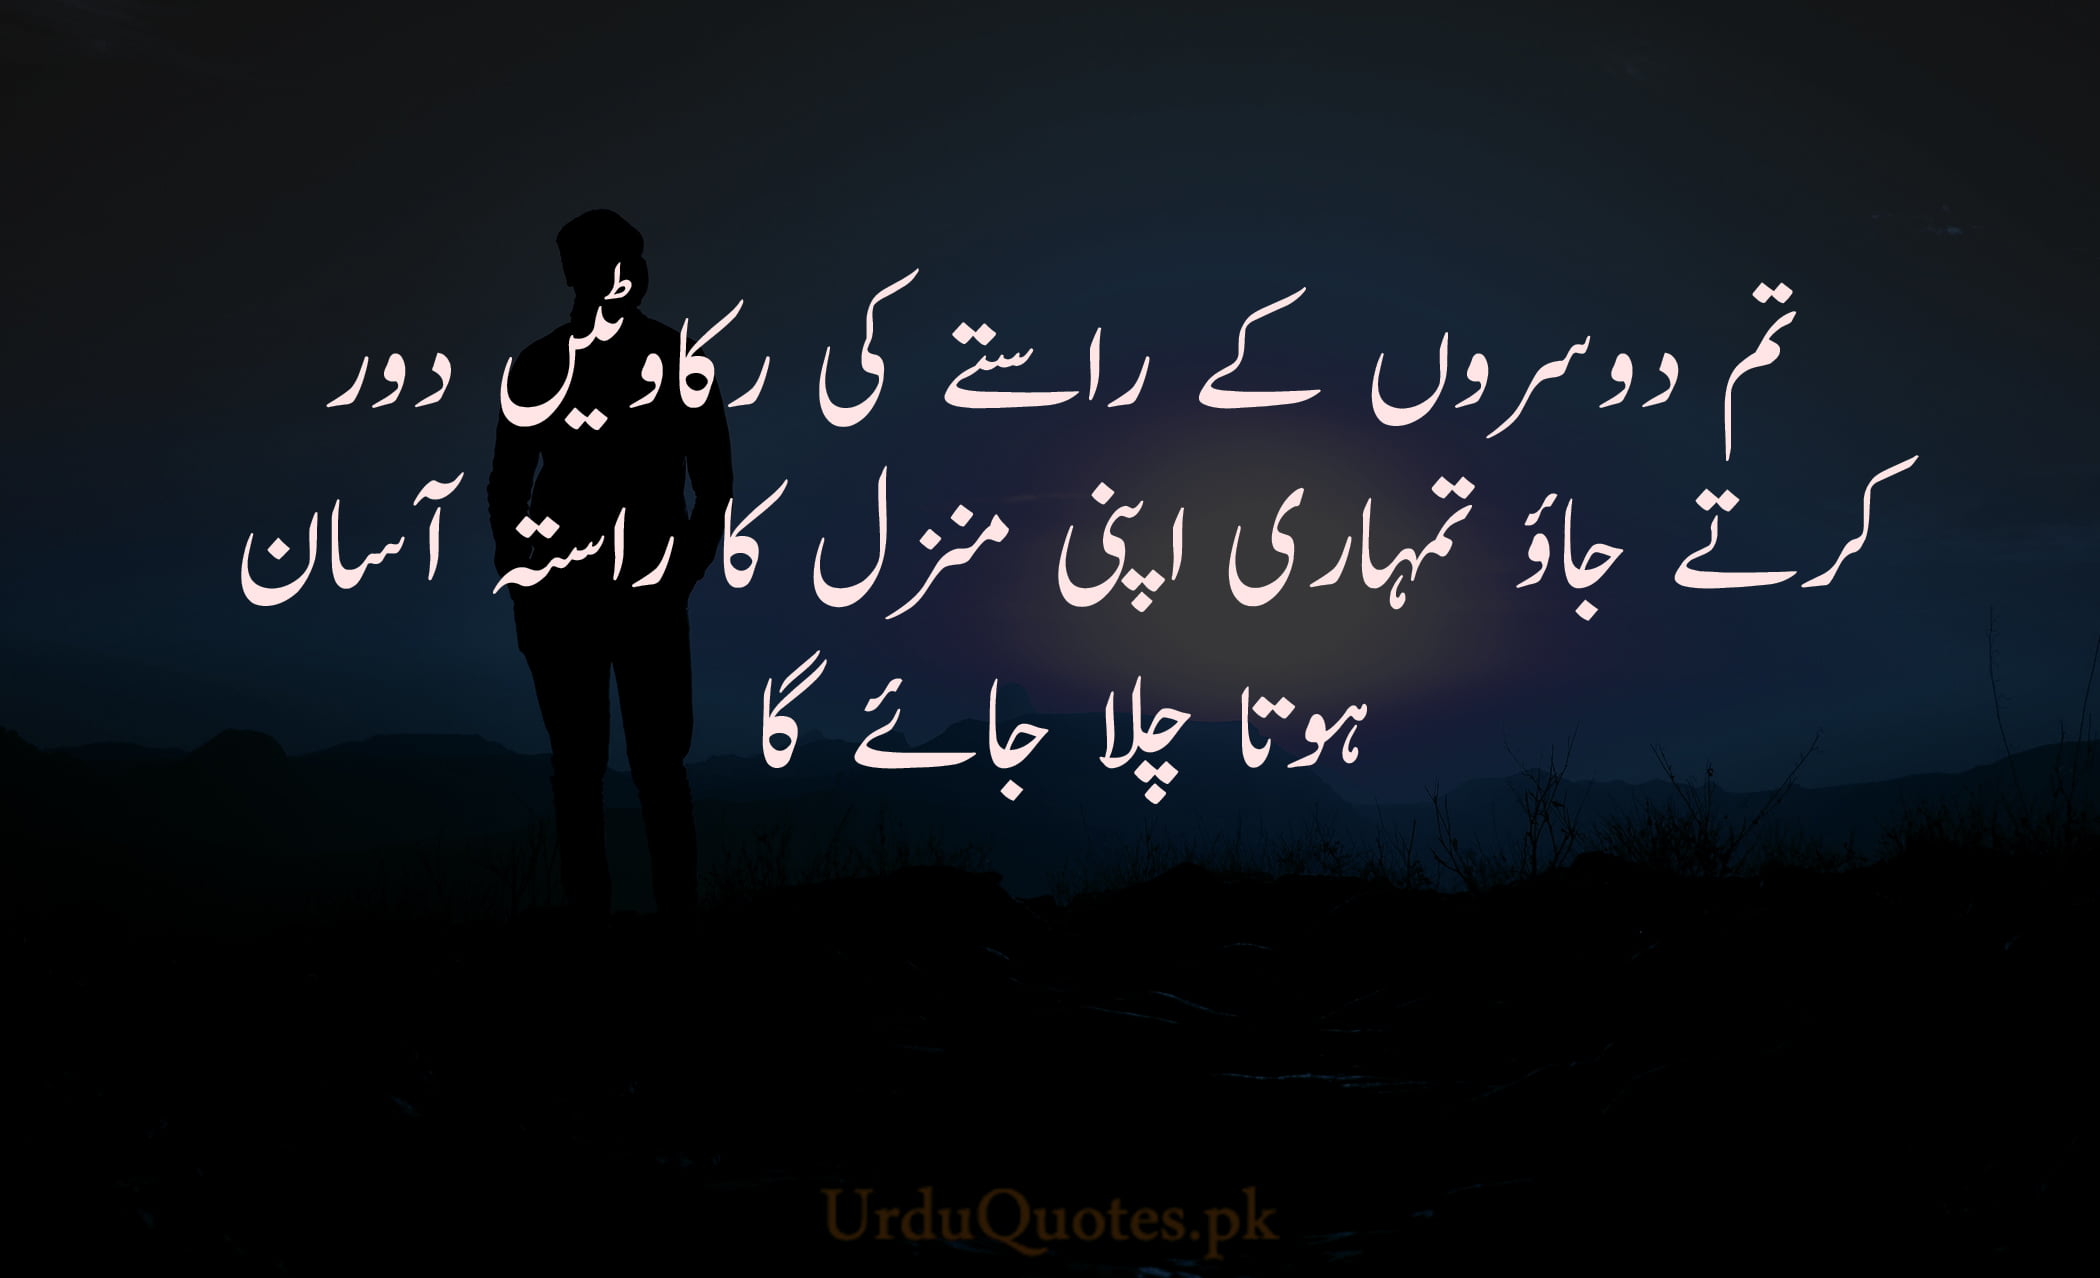 25+ Urdu Quotes with Images and Text